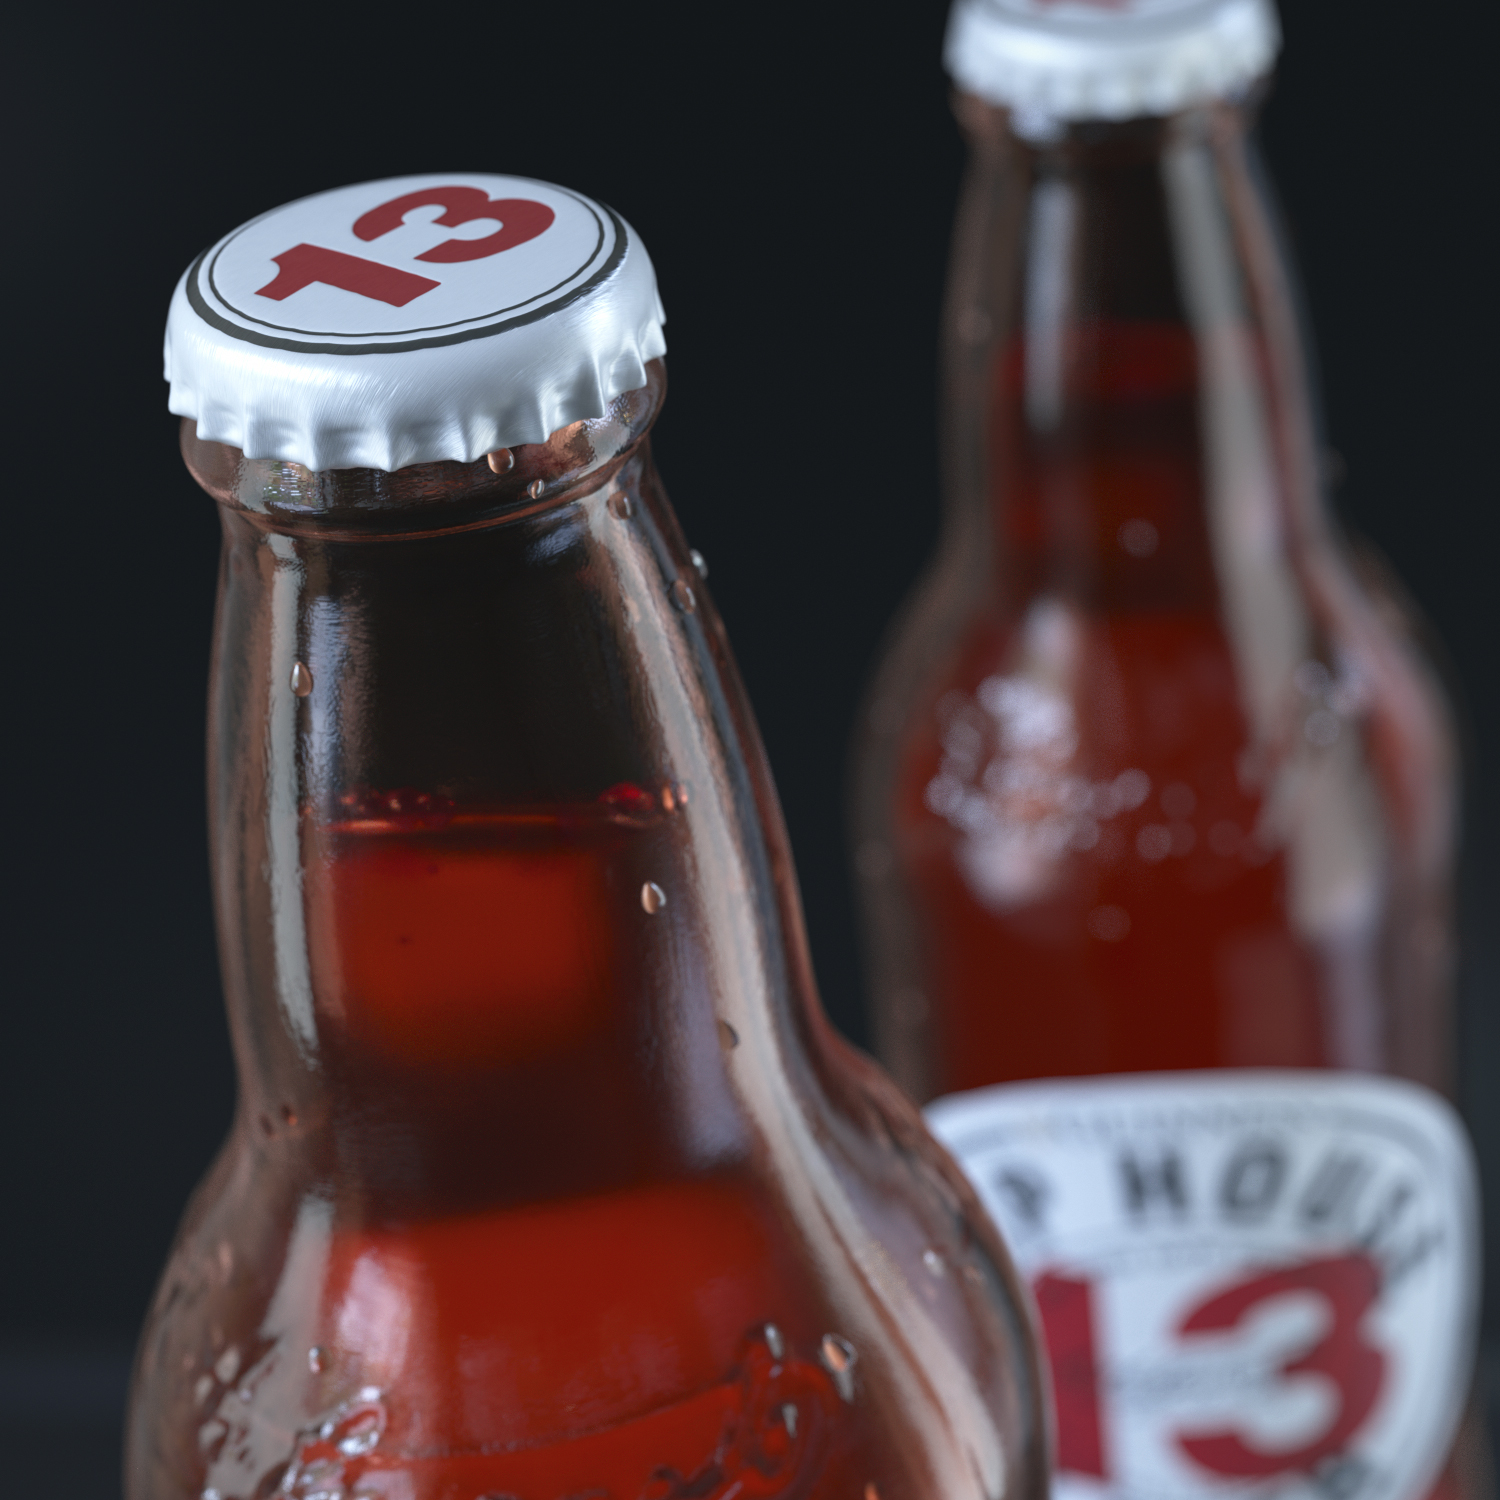 Still-Life 3D model. Bottle detail generated in 3D. Render of Octane worked with C4D